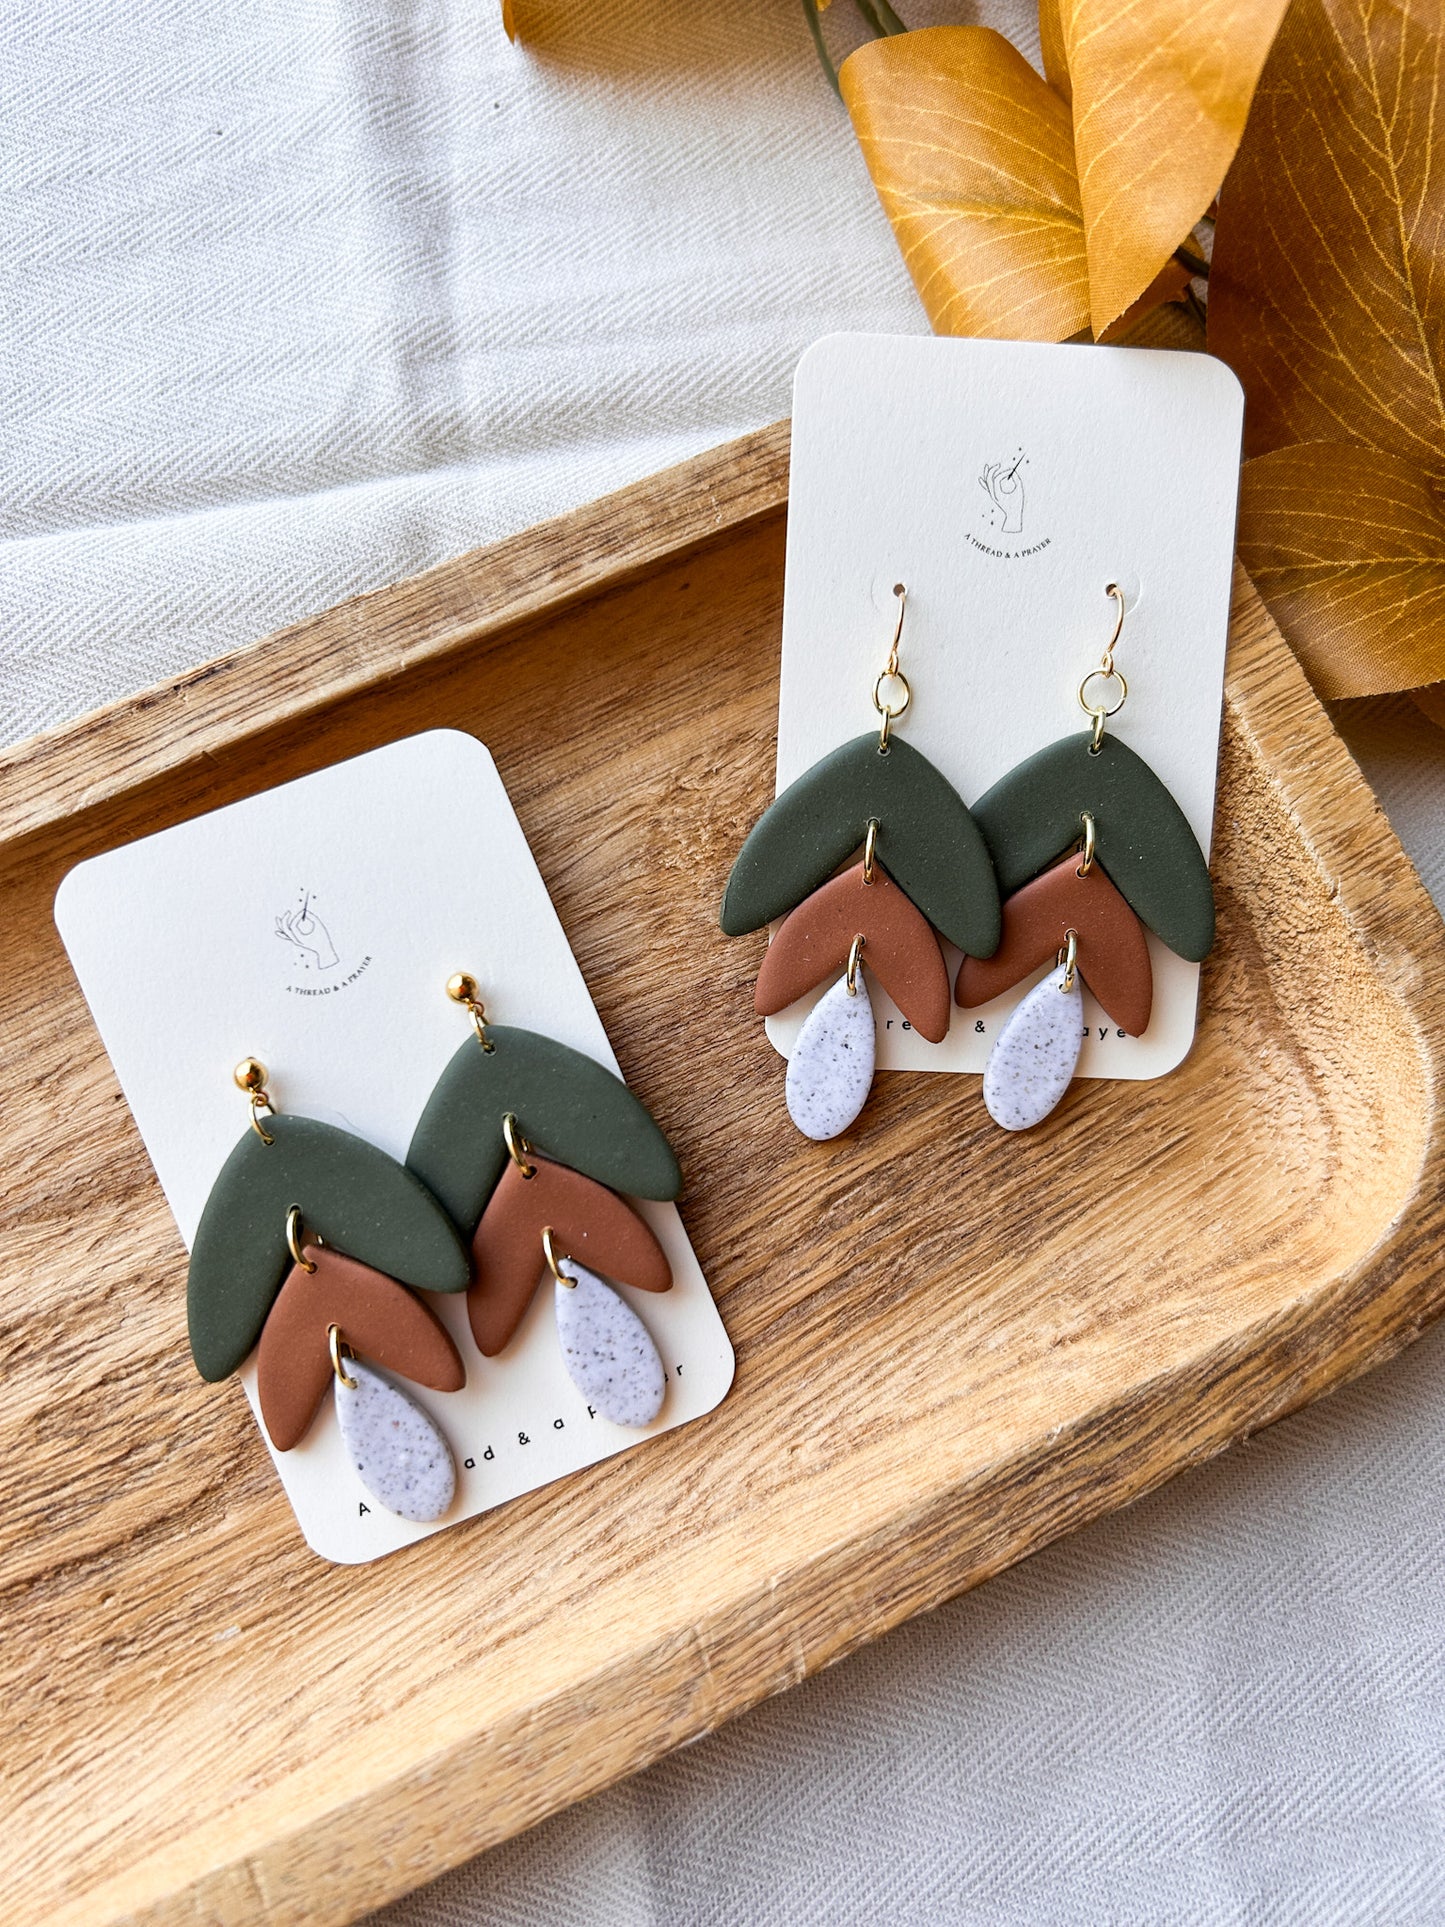 Falling for Autumn Tiered Clay Earrings | Fall Fashion | Autumn Earrings | Statement Earrings | Lightweight